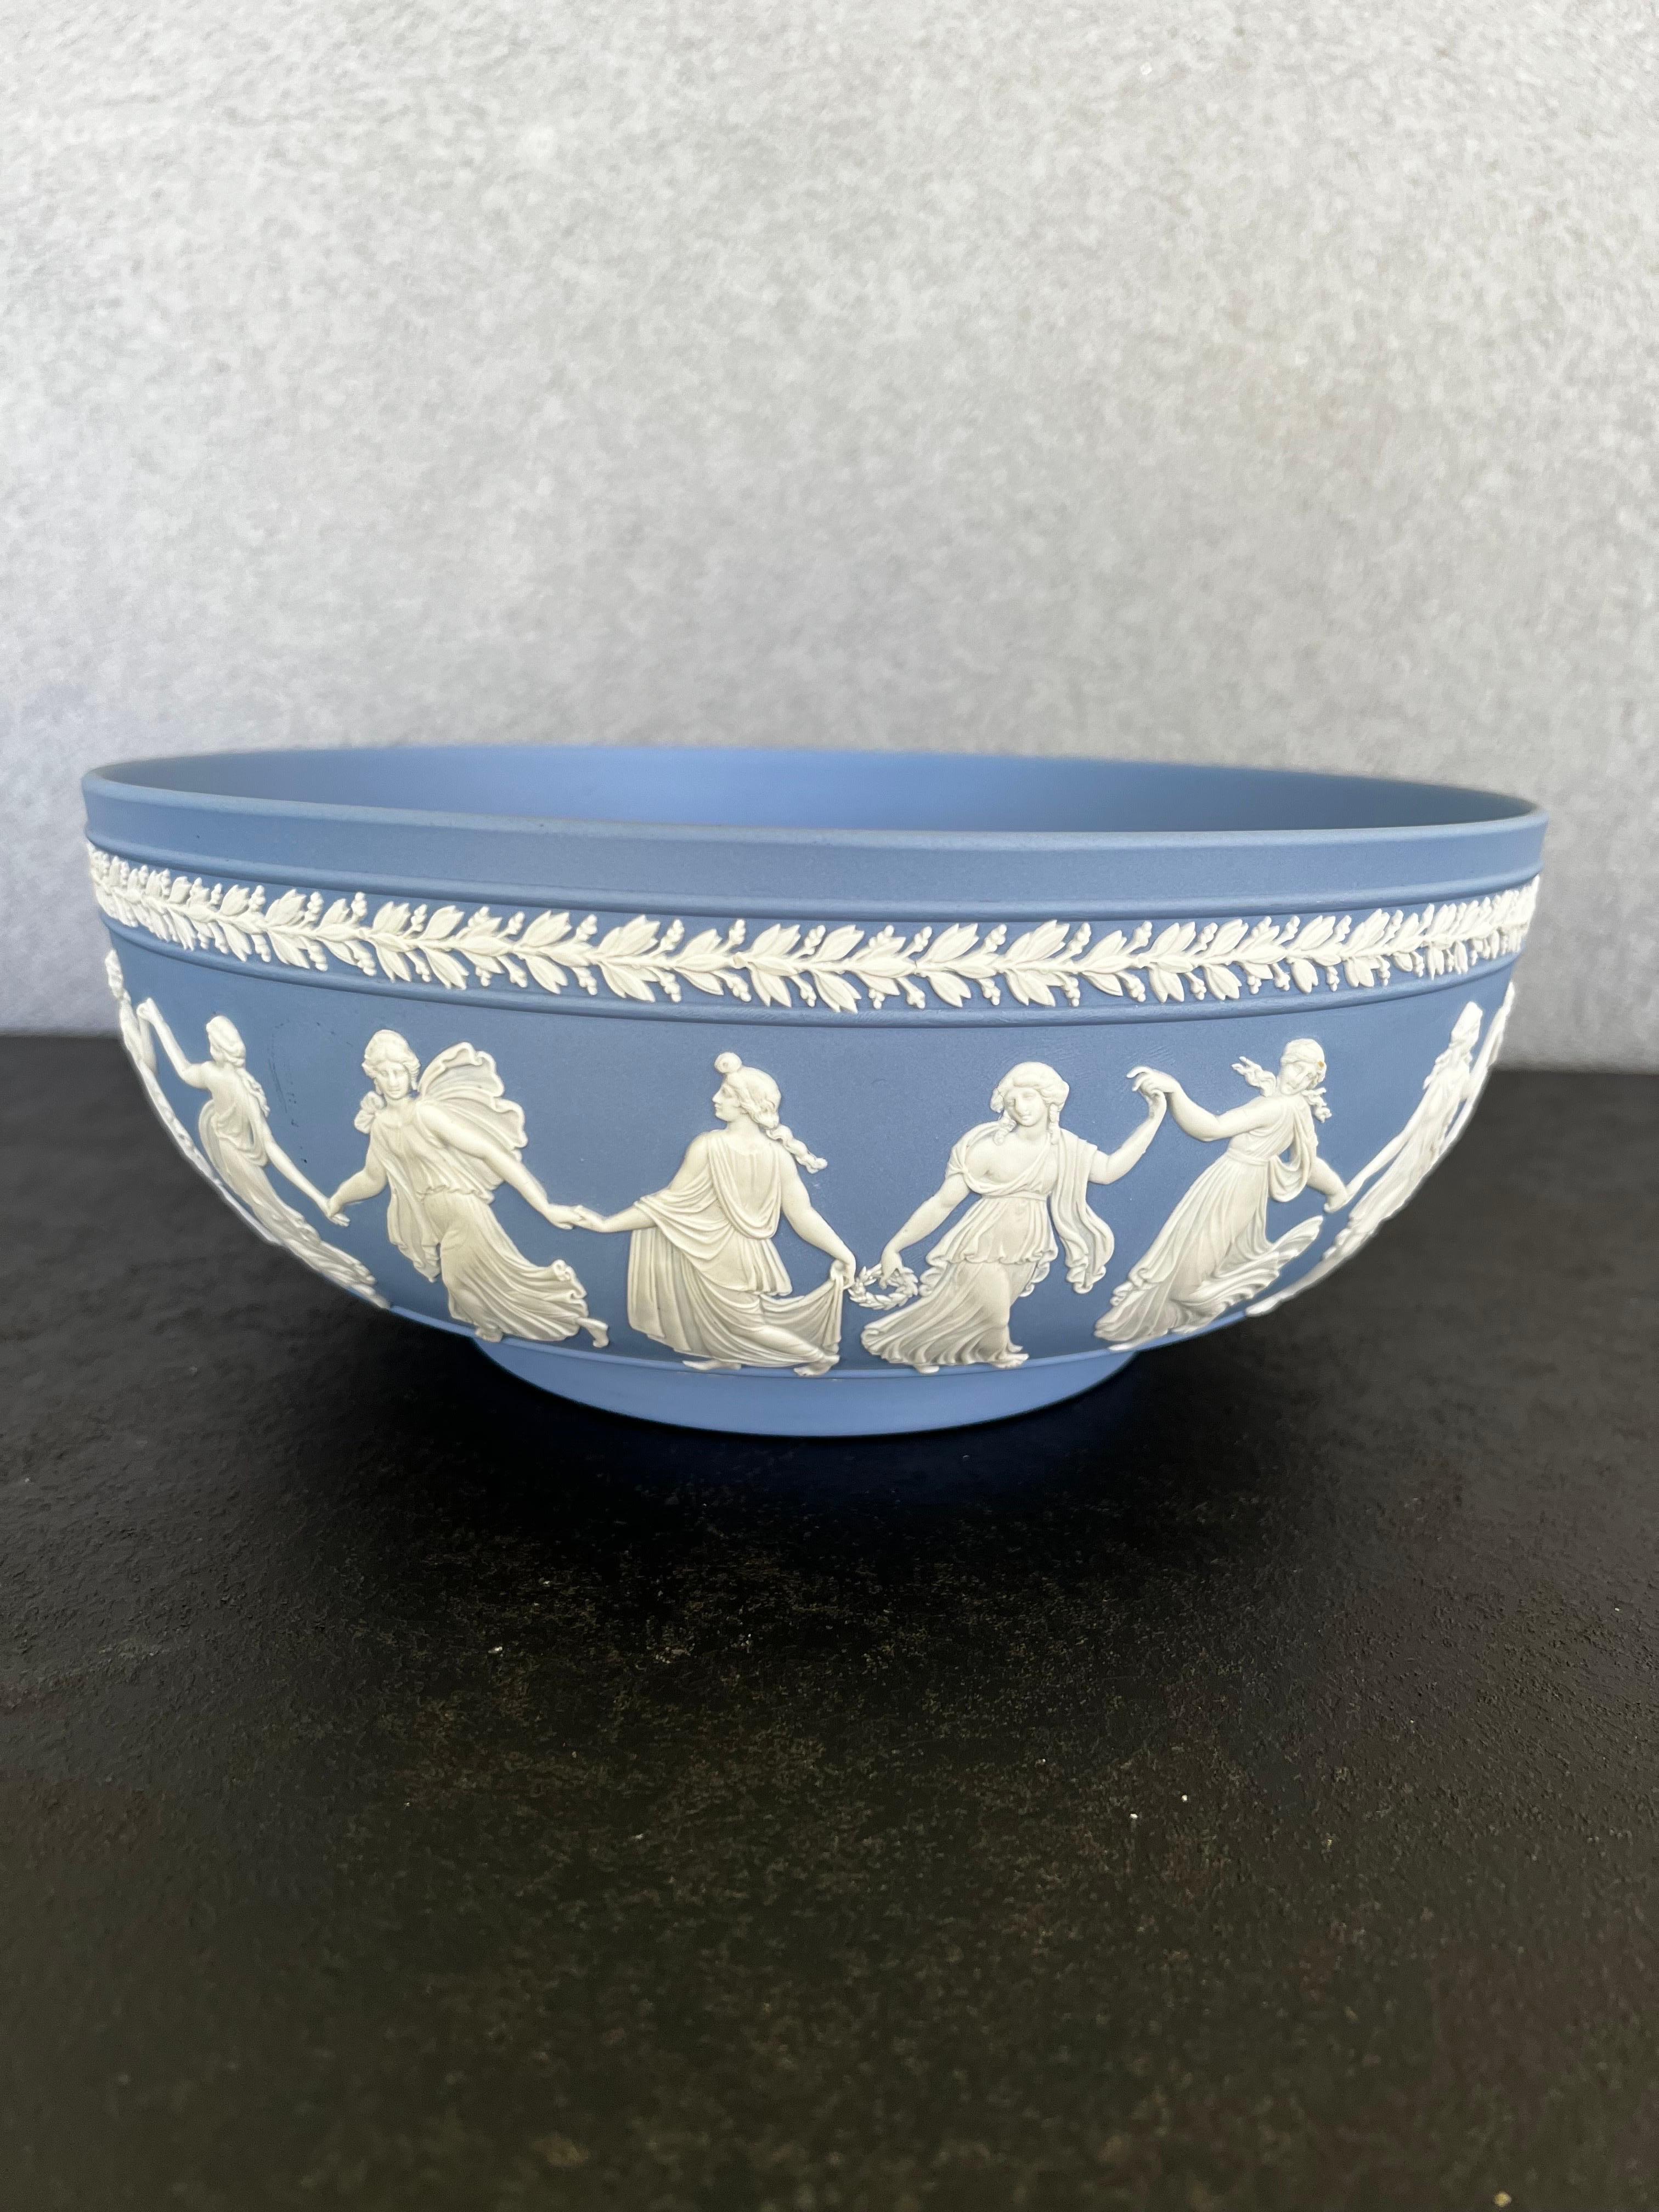 One of a kind - Wedgwood jasperware bas-relief Dancing Hours  bowl circa 1967
This is a beautiful Wedgwood jasperware bowl decorated with the Dancing Hours pattern in white on a blue jasperware background 
The bottom is marked Wedgwood, Made in